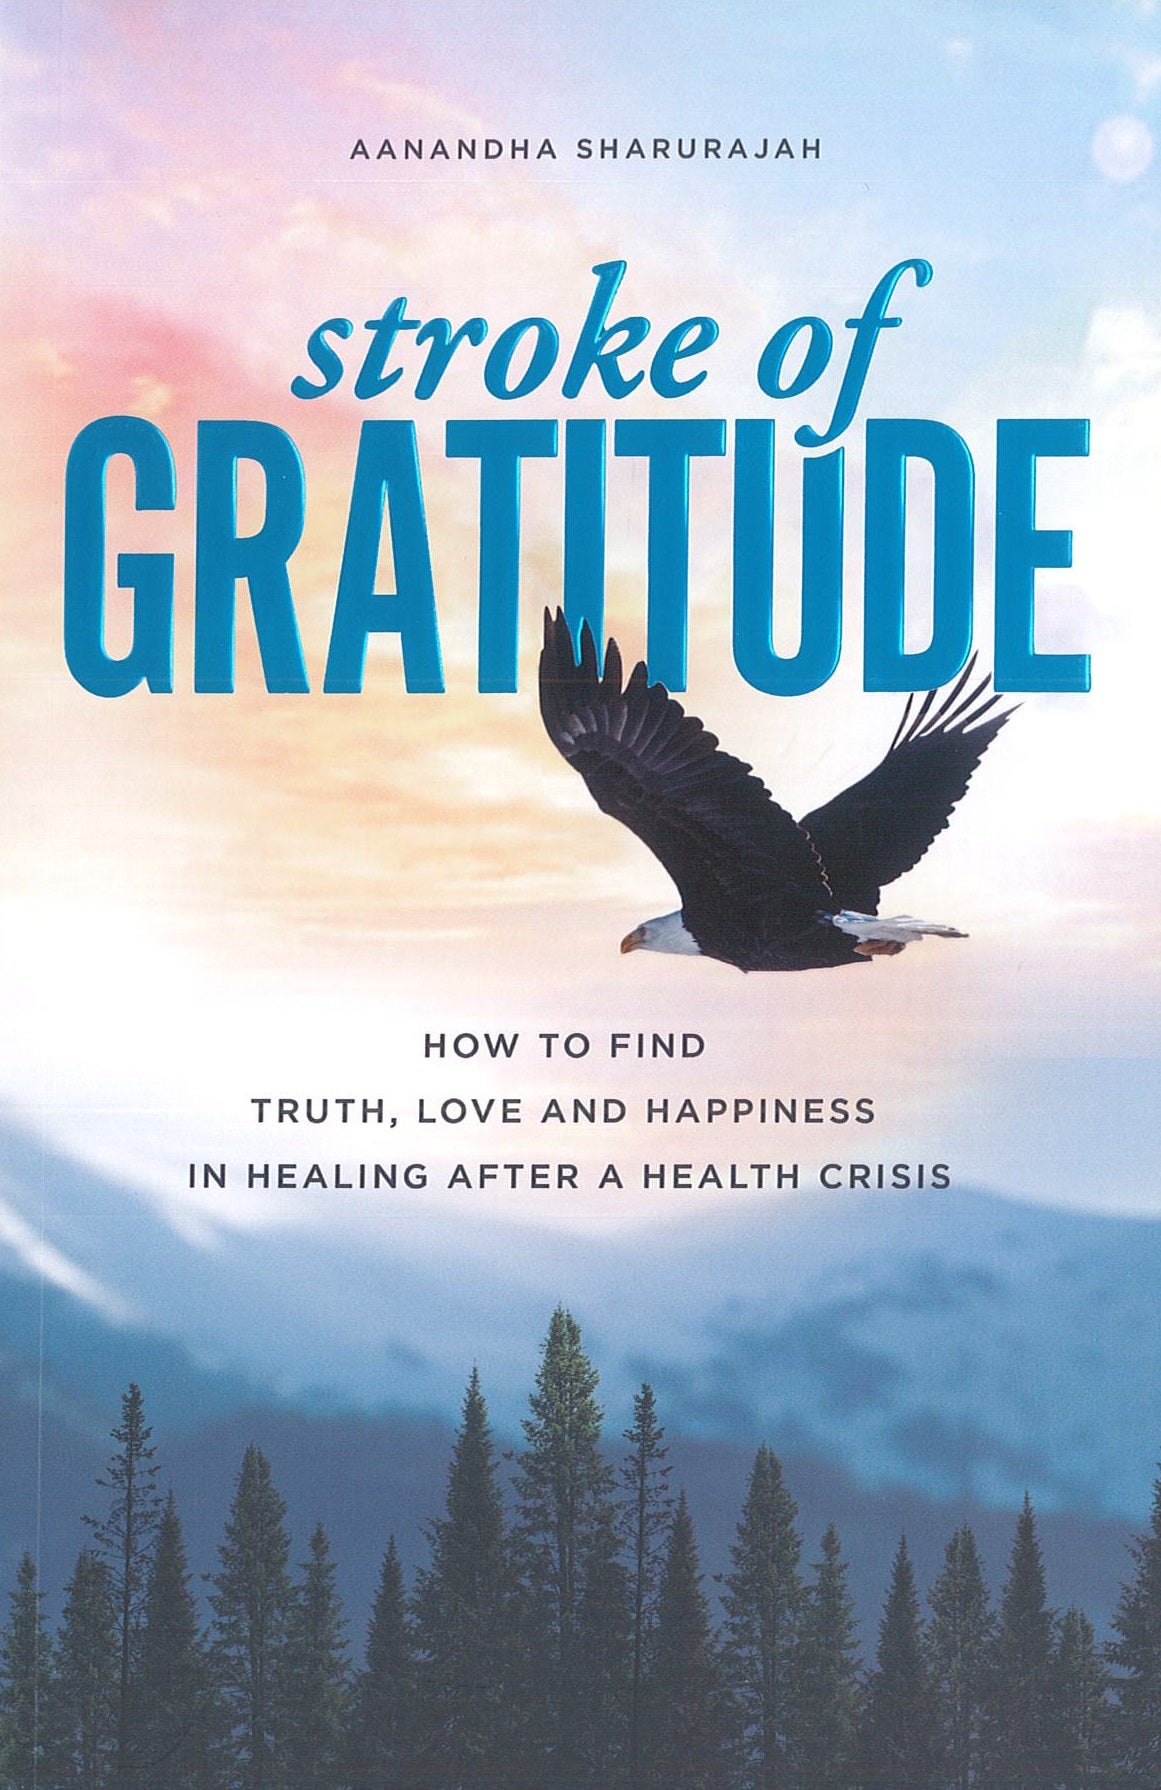 Stroke of Gratitude: How To Find Truth, Love And Happiness In Healing After A Health Crisis